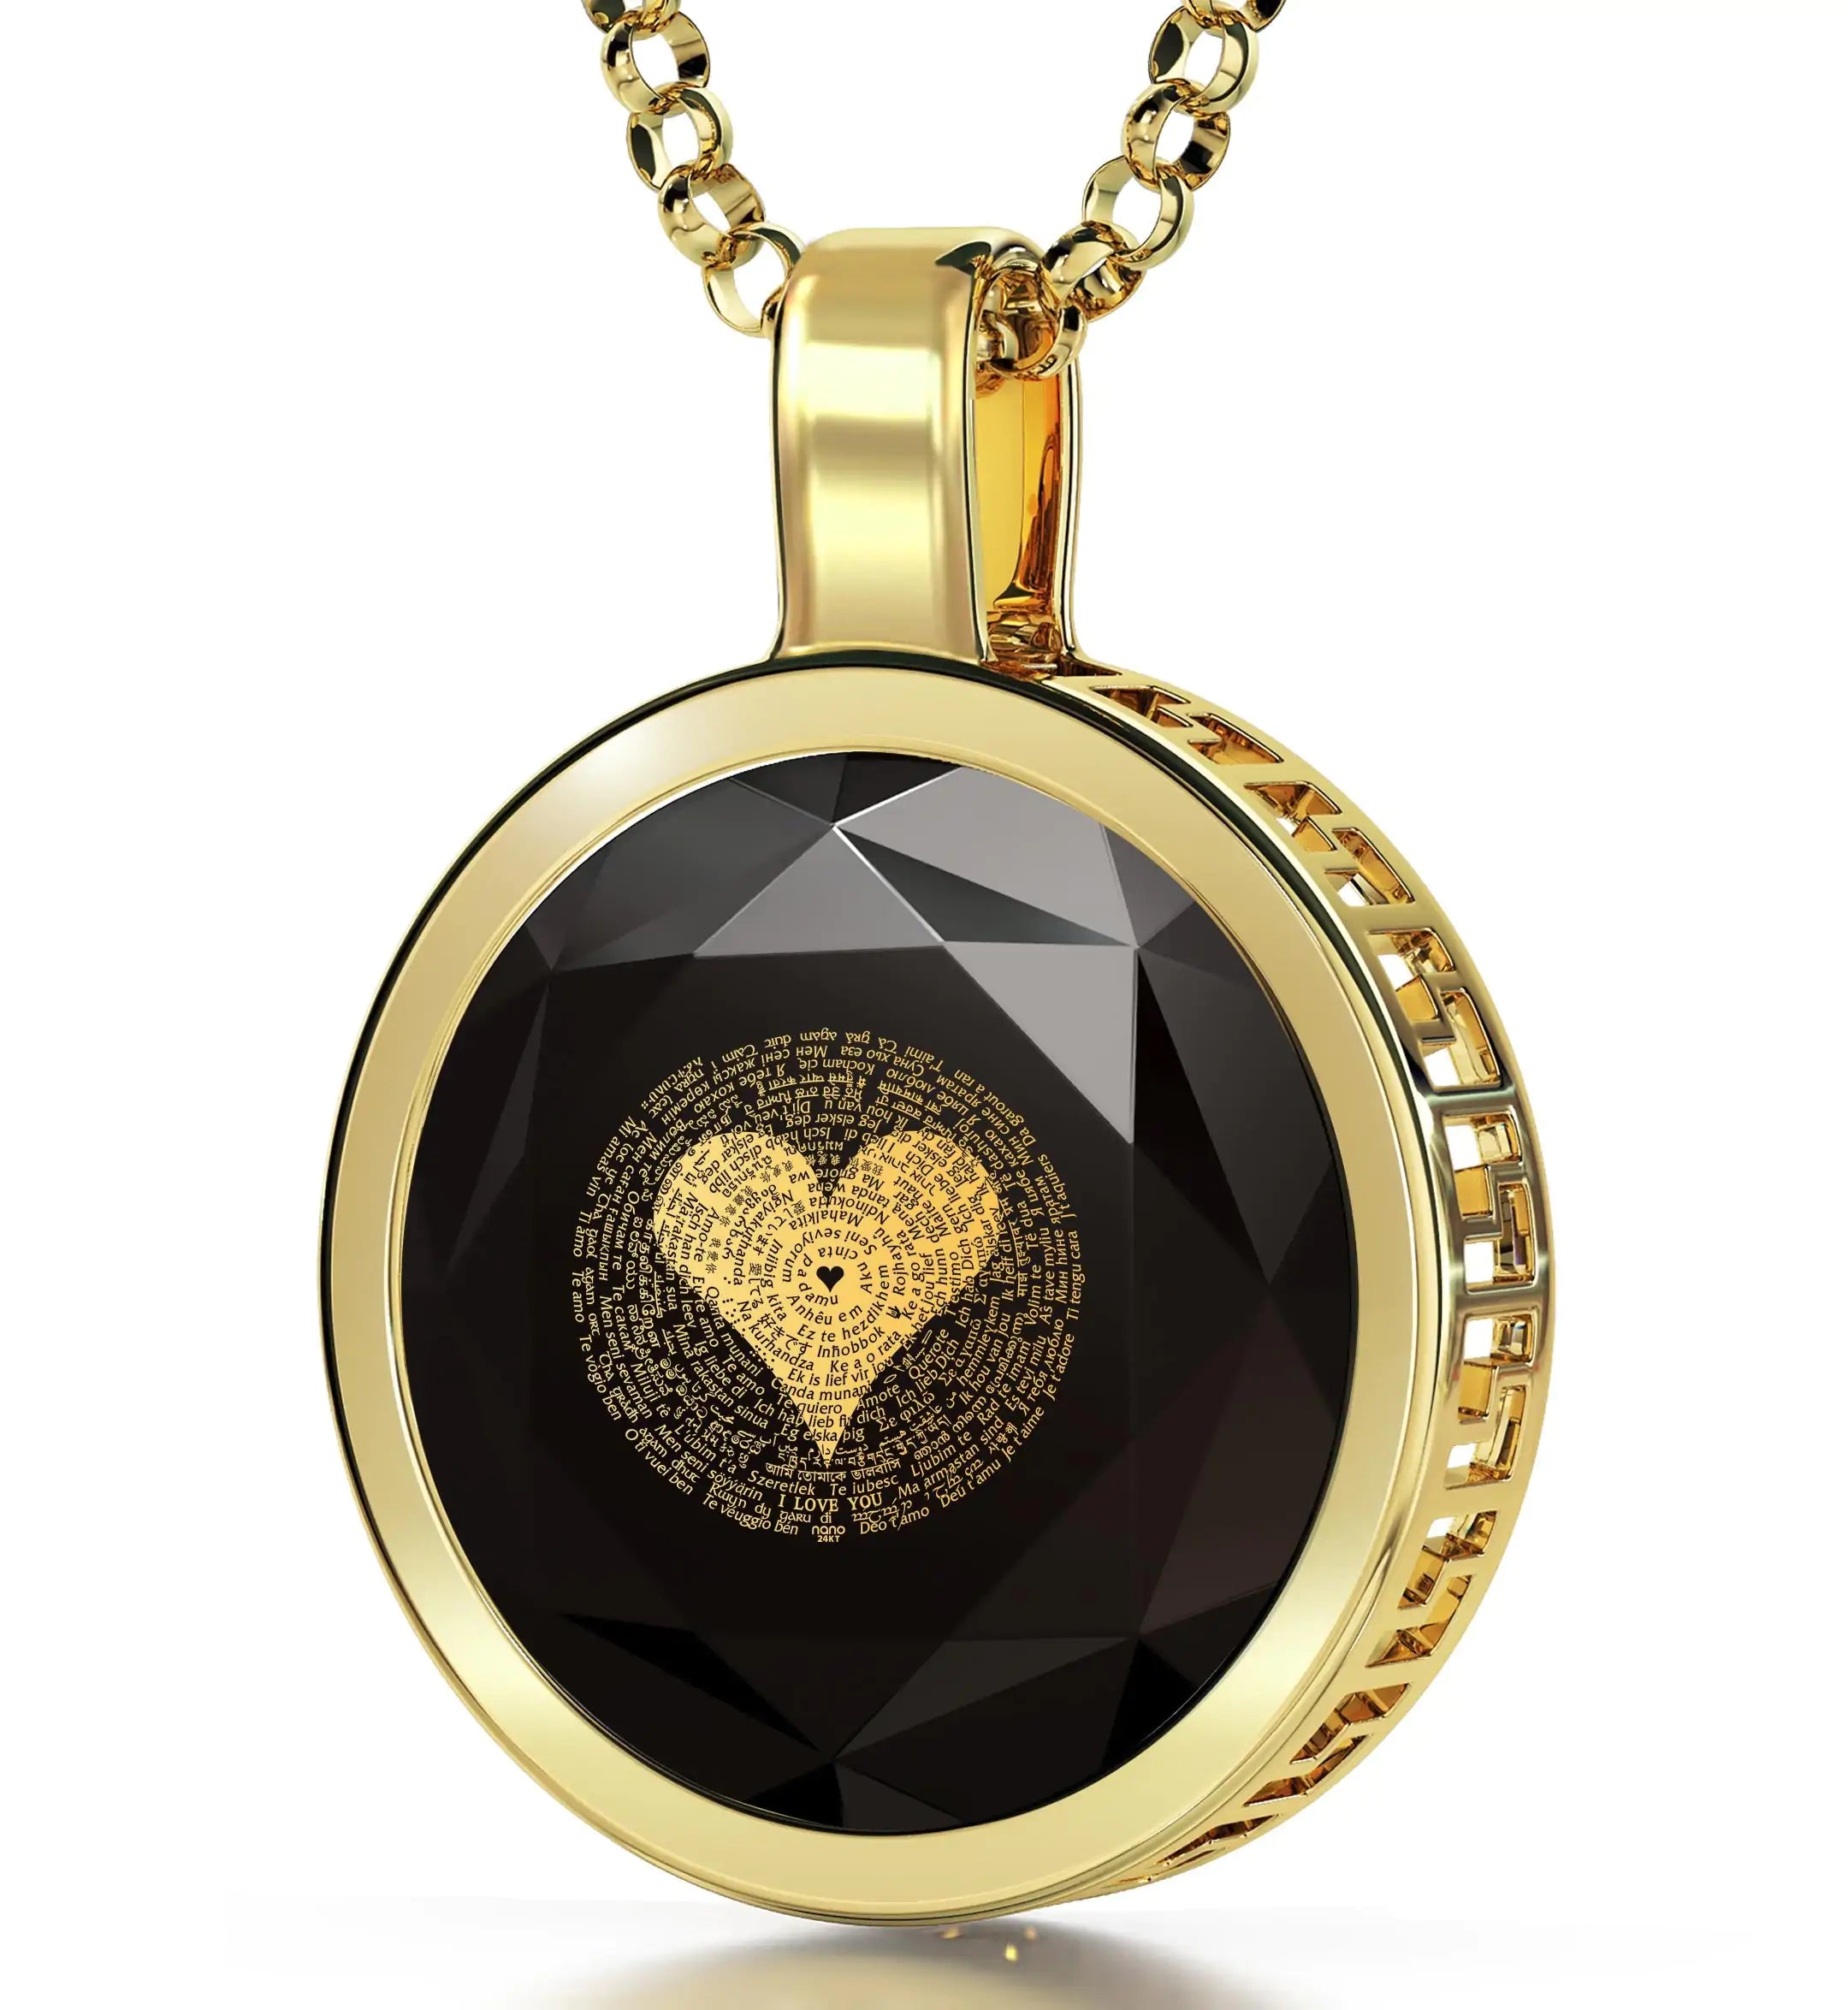 A close-up of a Gold Plated Silver I Love You Necklace with inscriptions forming a heart shape at the center, perfect as an anniversary gift.